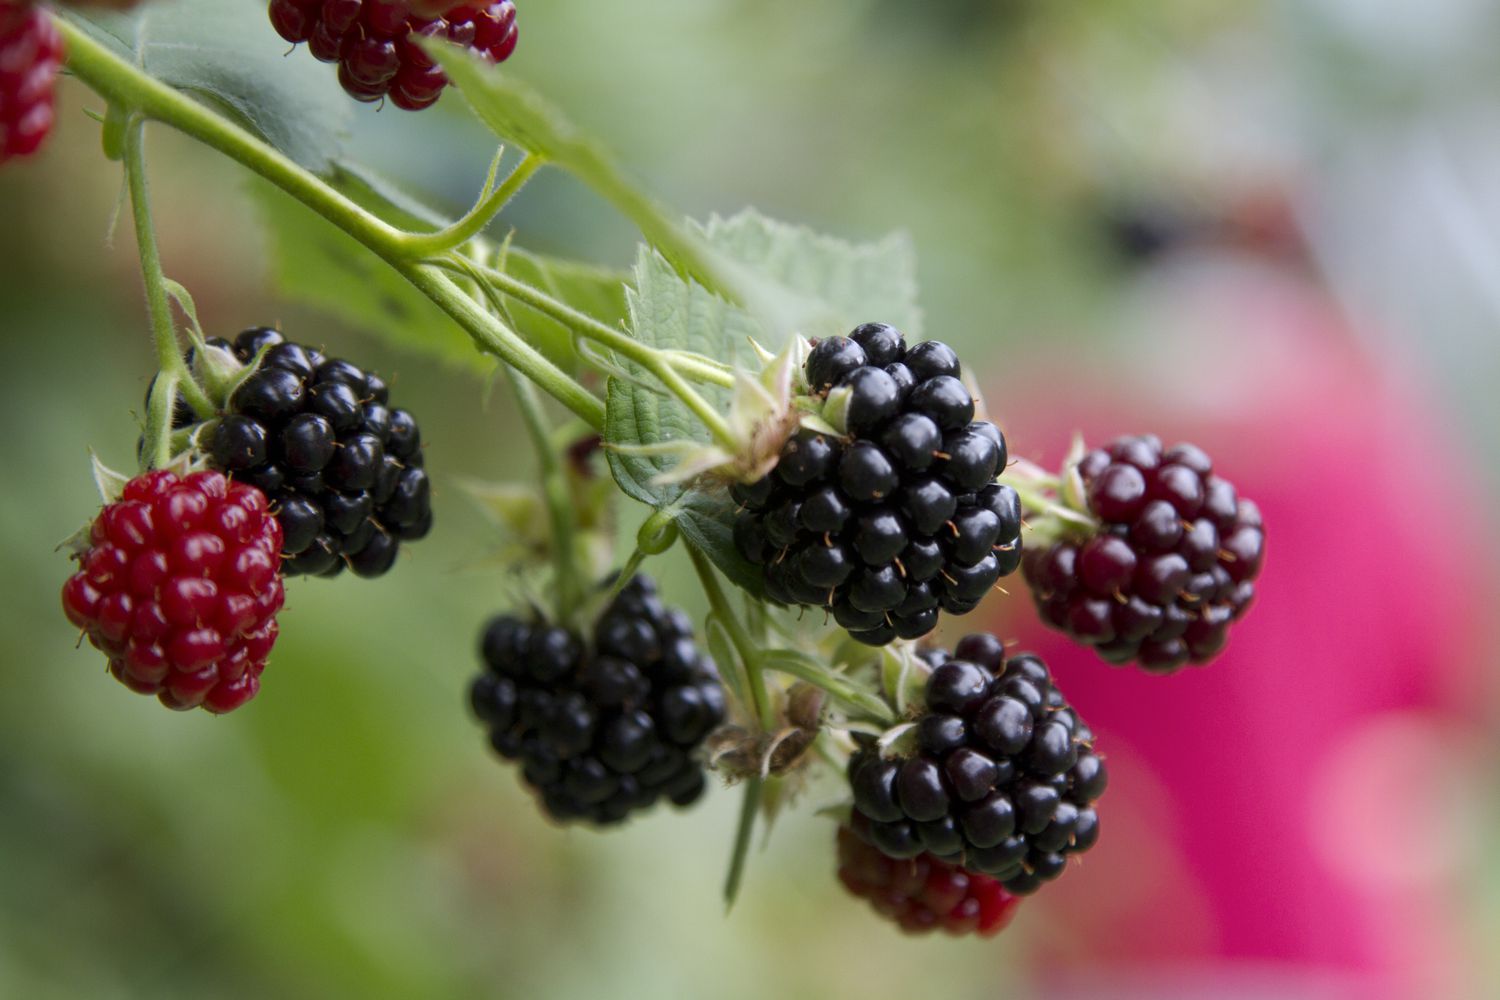 How To Grow Blackberries From Seeds